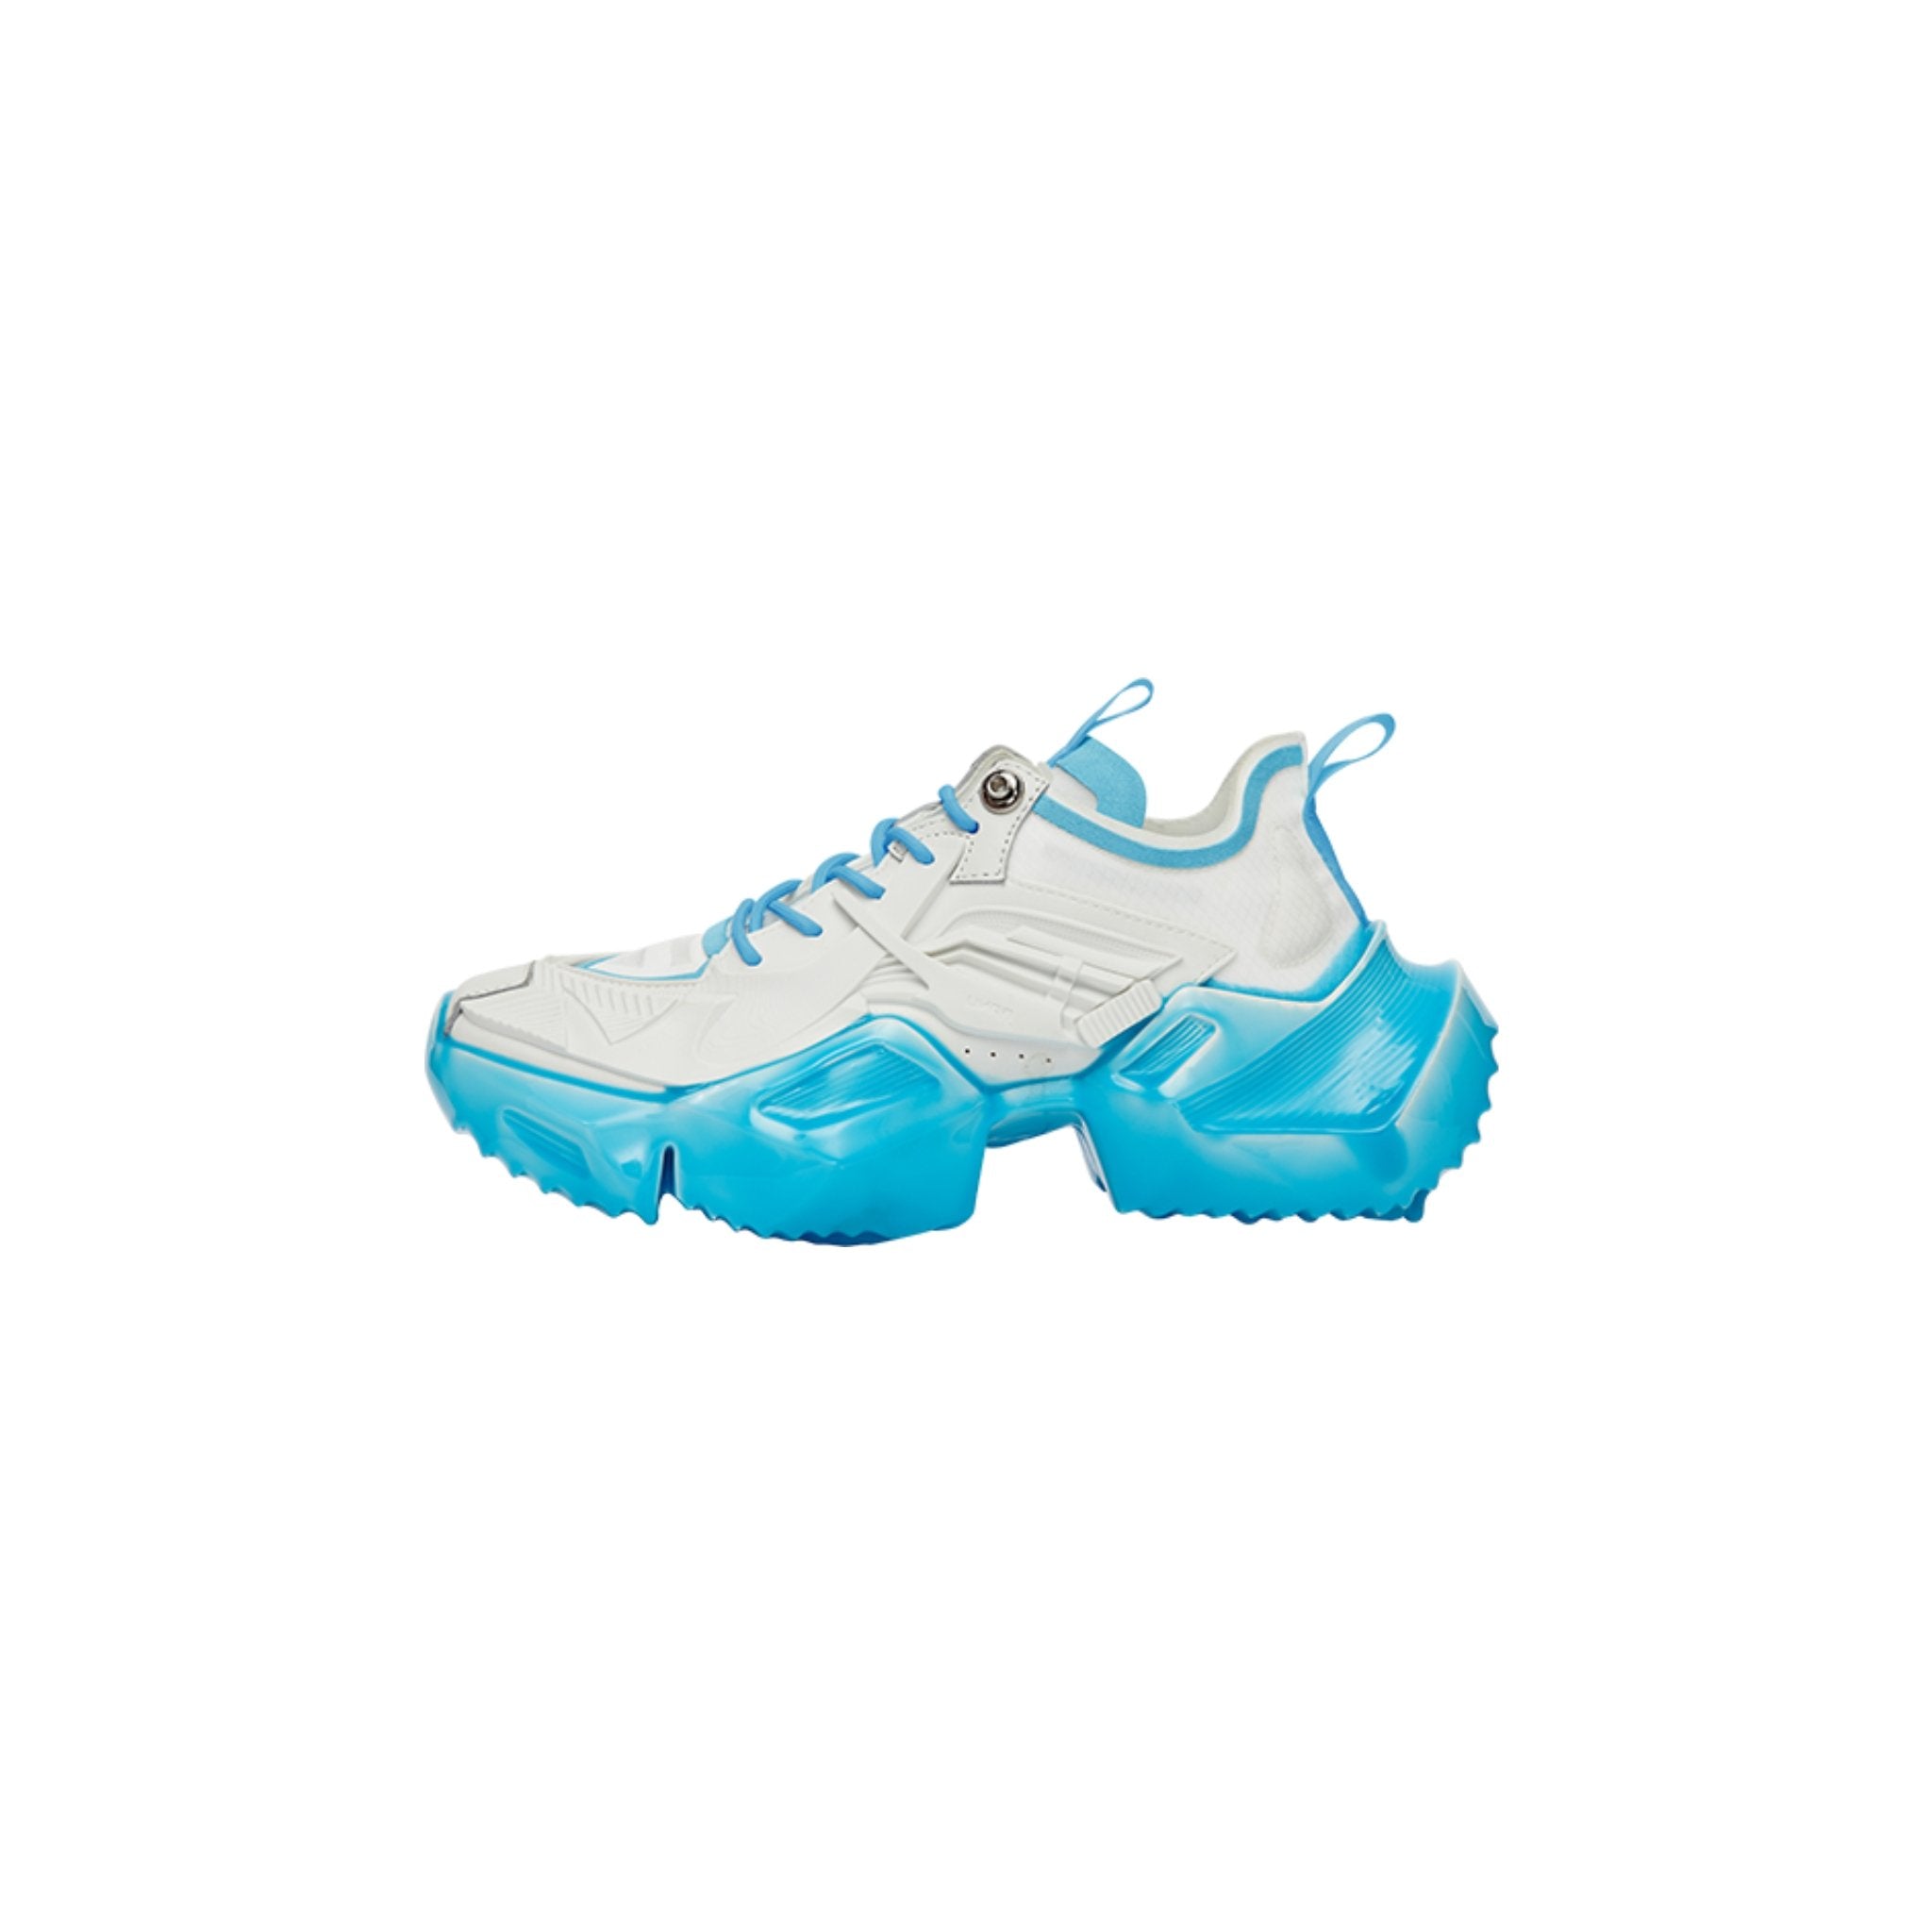 OGR MECHA Rong Classic 3D Sneaker Glacier Blue | MADA IN CHINA